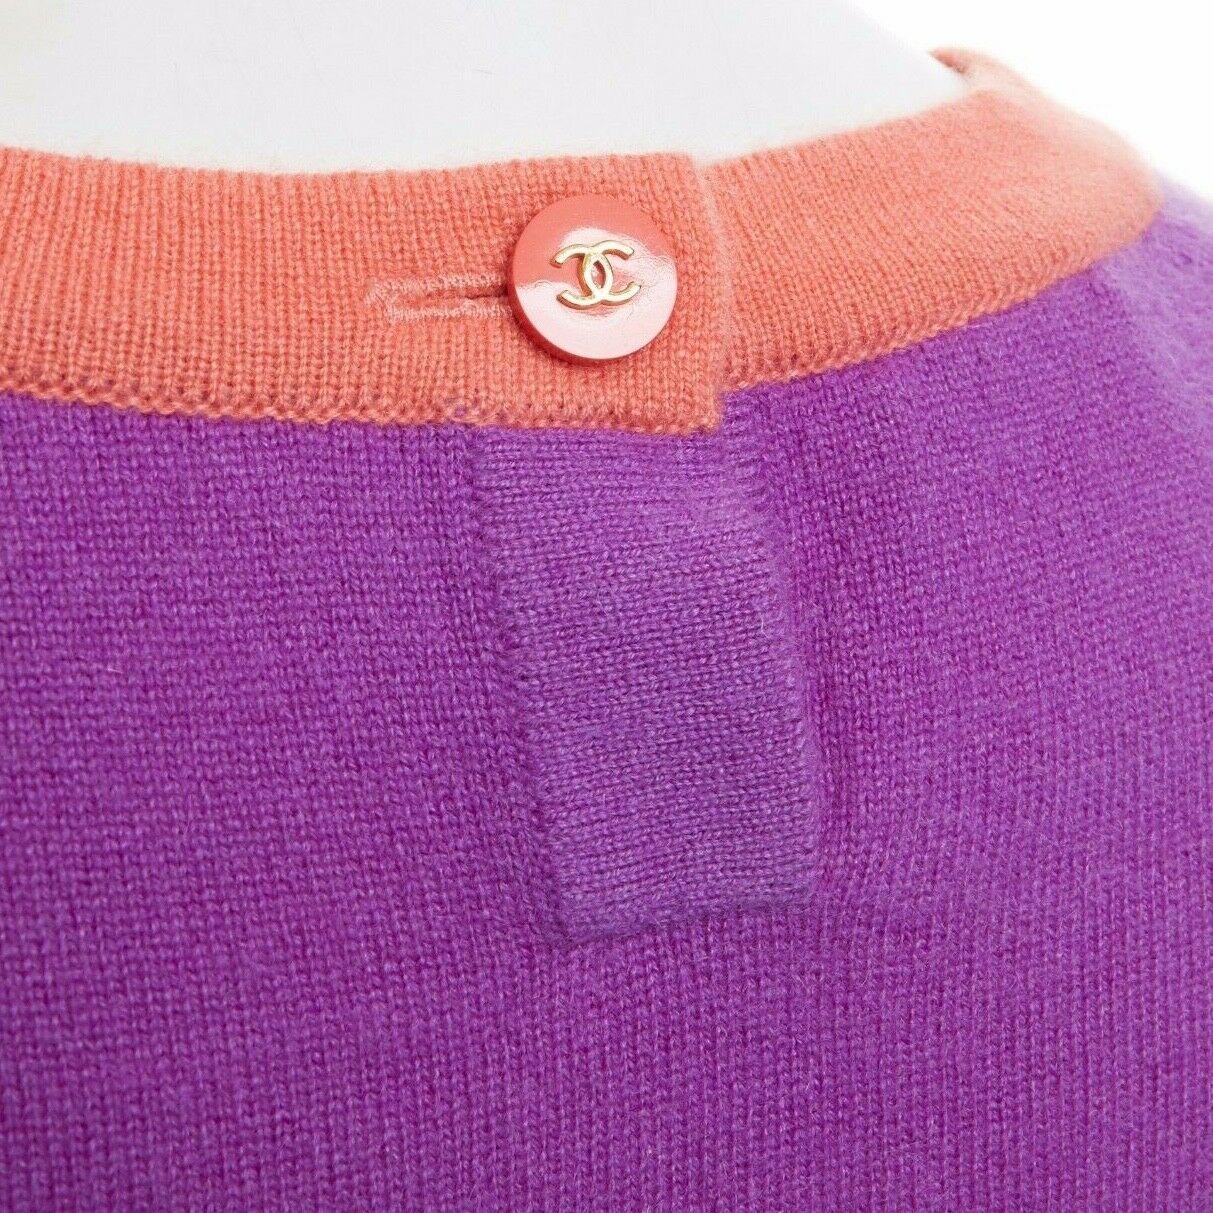 CHANEL 95A 100% cashmere purple pink trimmed neckline short sleeve sweater FR38
Brand: Chanel
Designer: Karl Lagerfeld
Collection: 95A
Model Name / Style: Cashmere sweater
Material: Cashmere
Color: Purple; pink trimming
Pattern: Solid
Extra Detail: